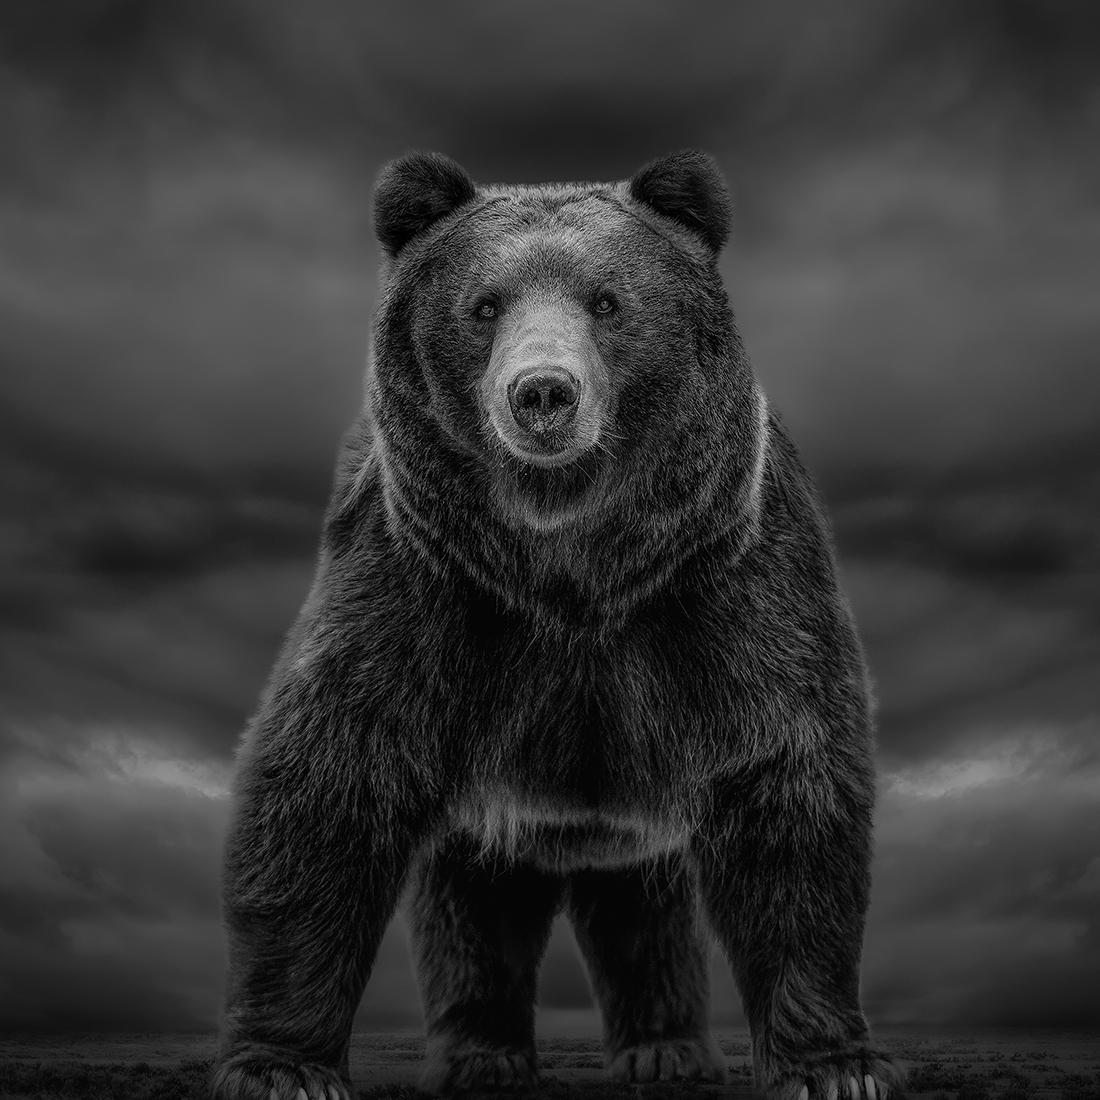 Shane Russeck Animal Print - 40x40  Black & White Photography, Grizzly Bear Unsigned Print "Times like These"